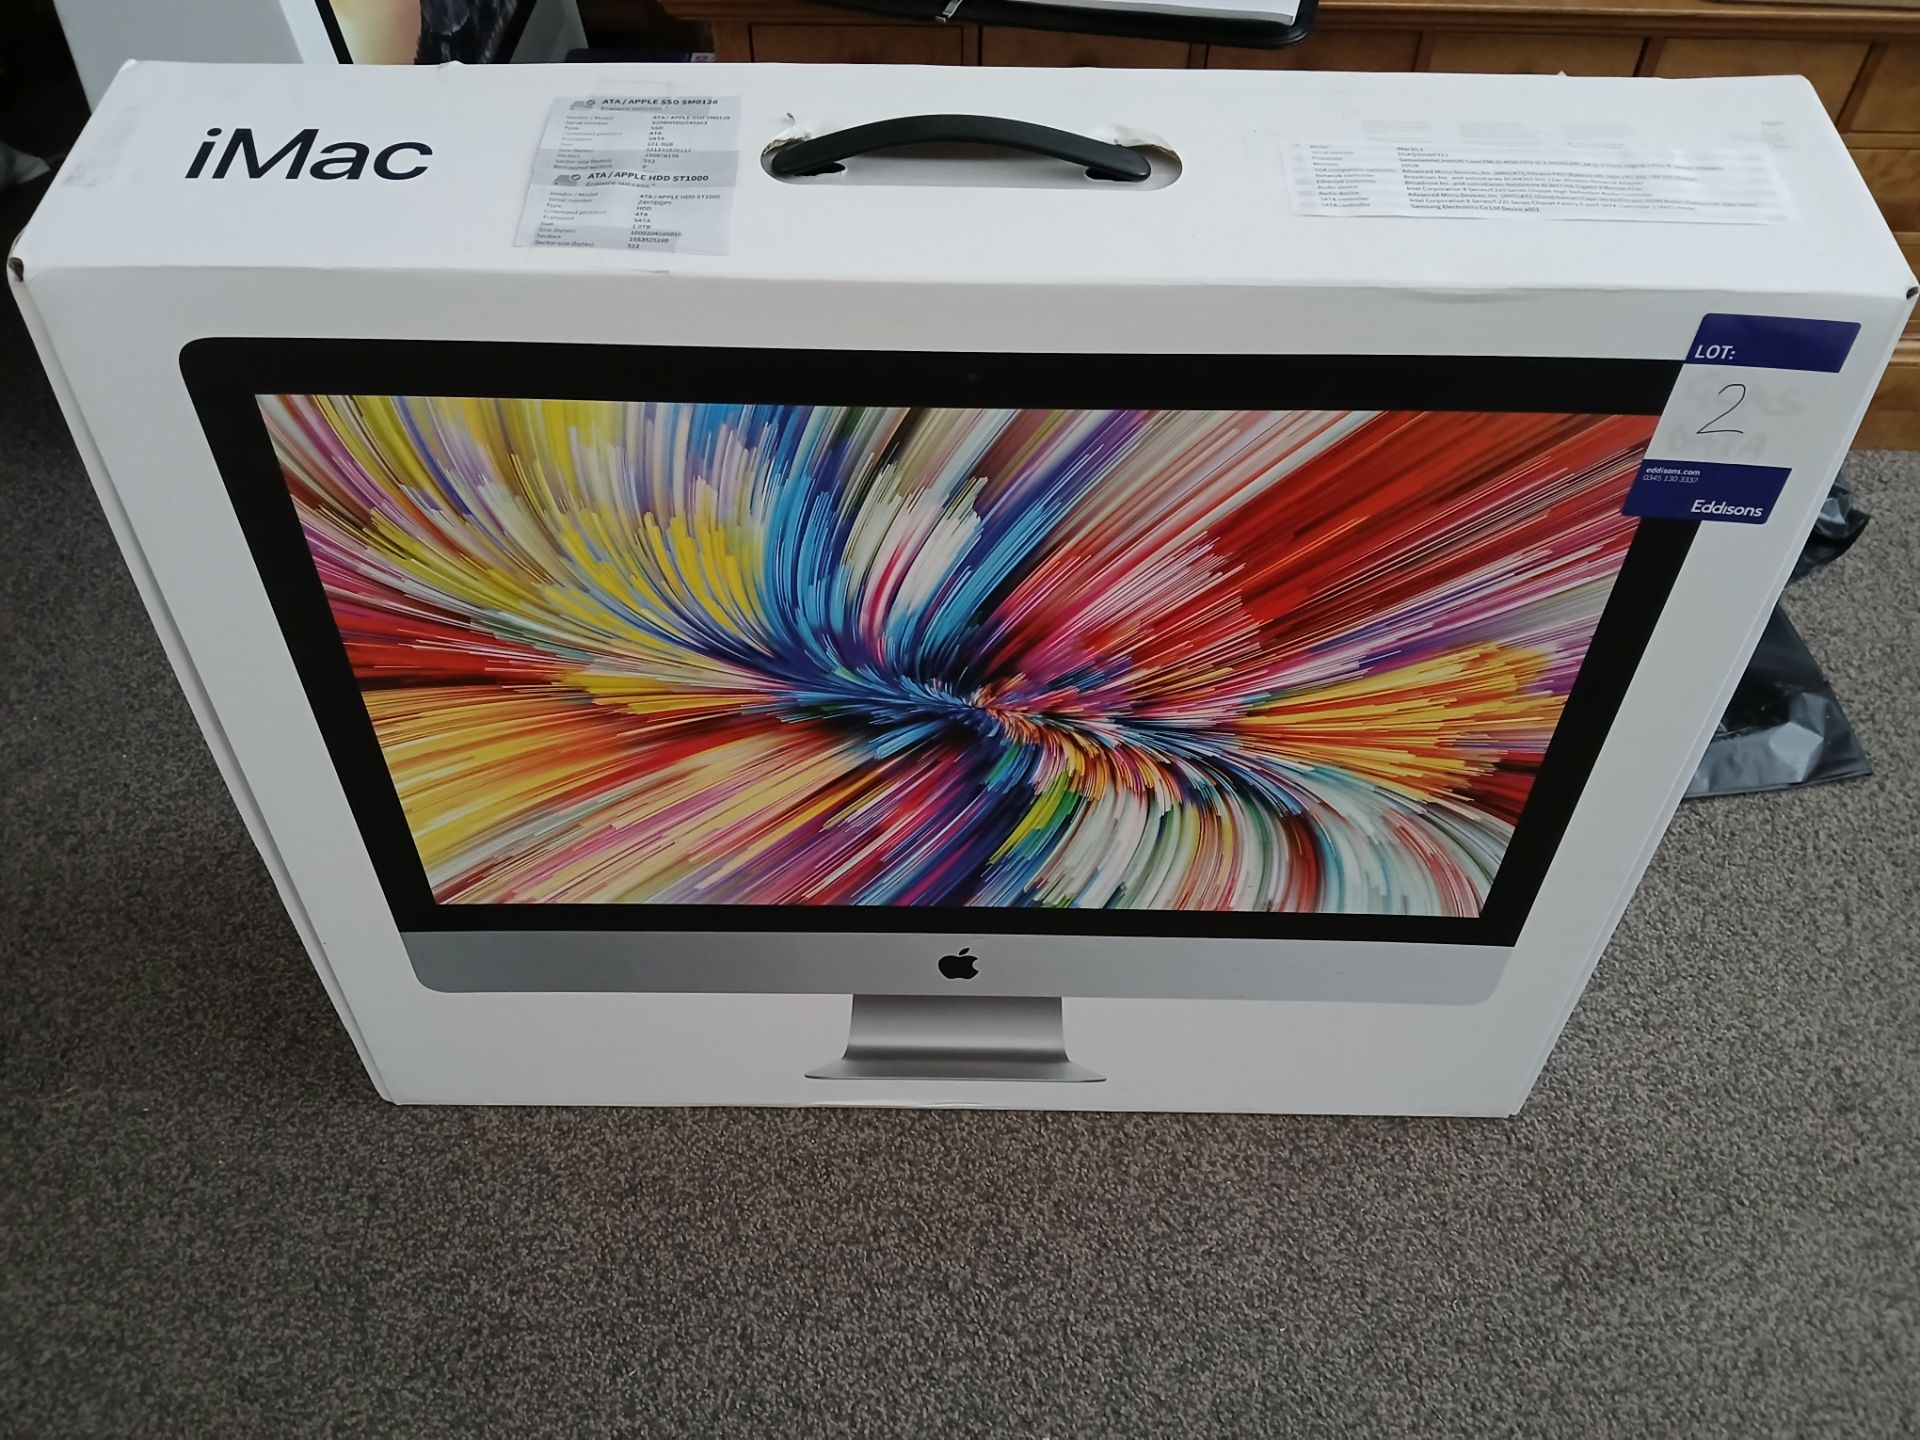 Apple iMac (Retina 5K, 27”, Mid 2015), Serial Number DGKQ306WFY13, with keyboard (No Mouse or